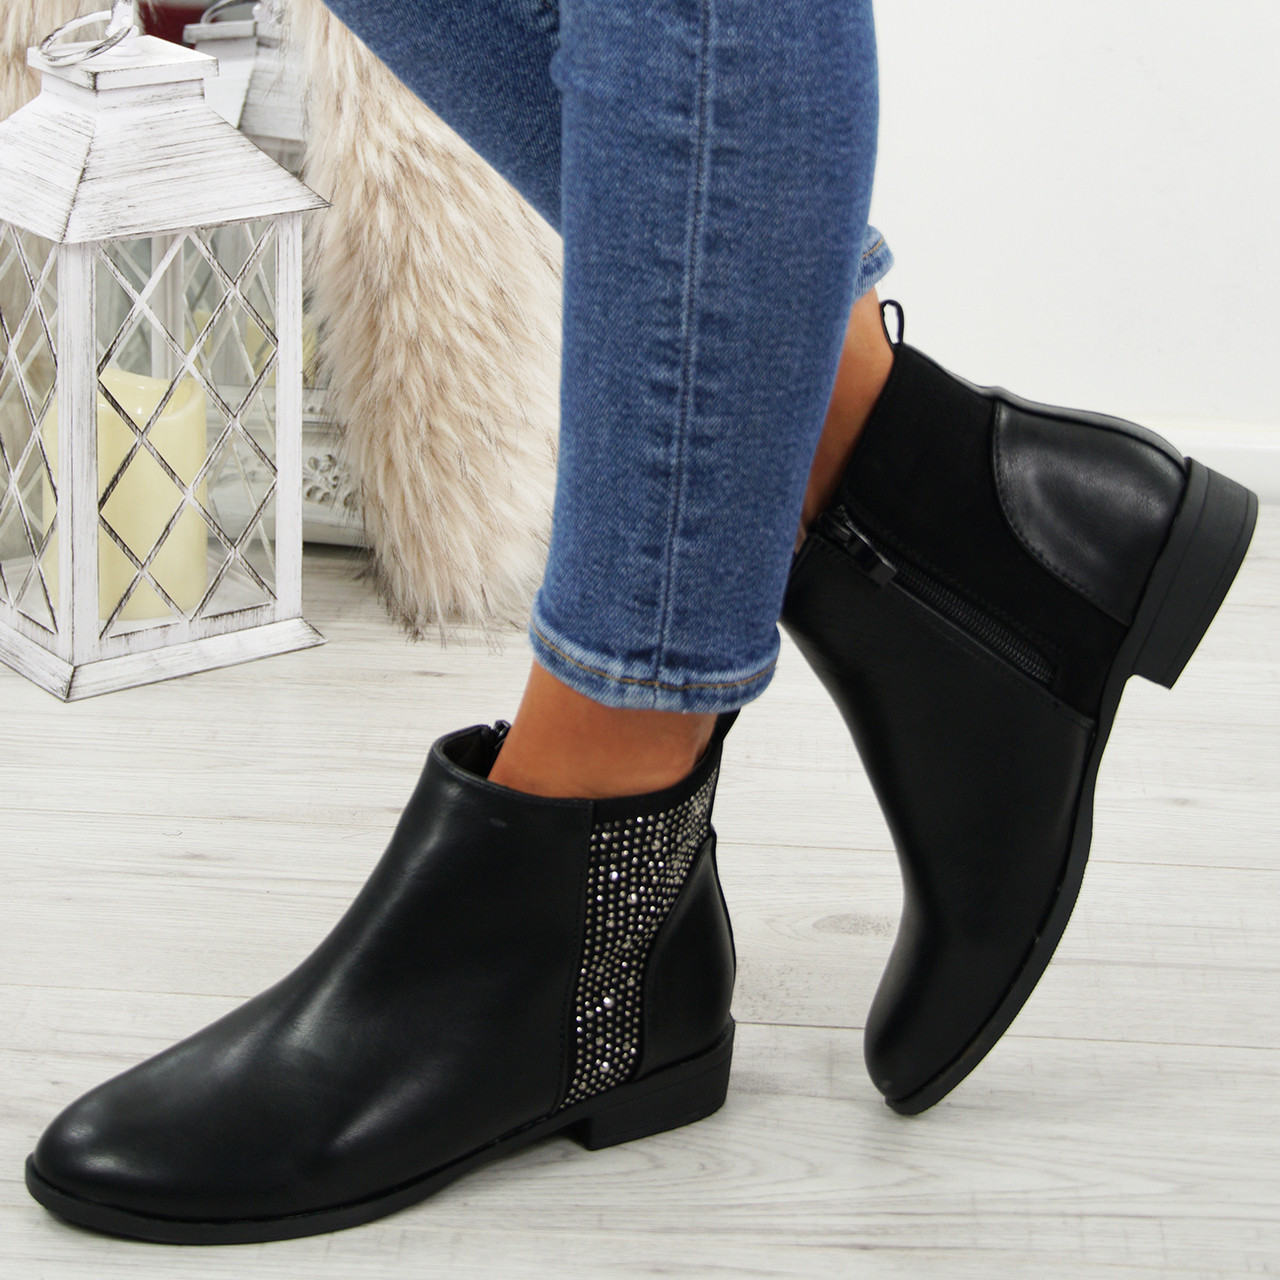 ladies flat ankle boots uk